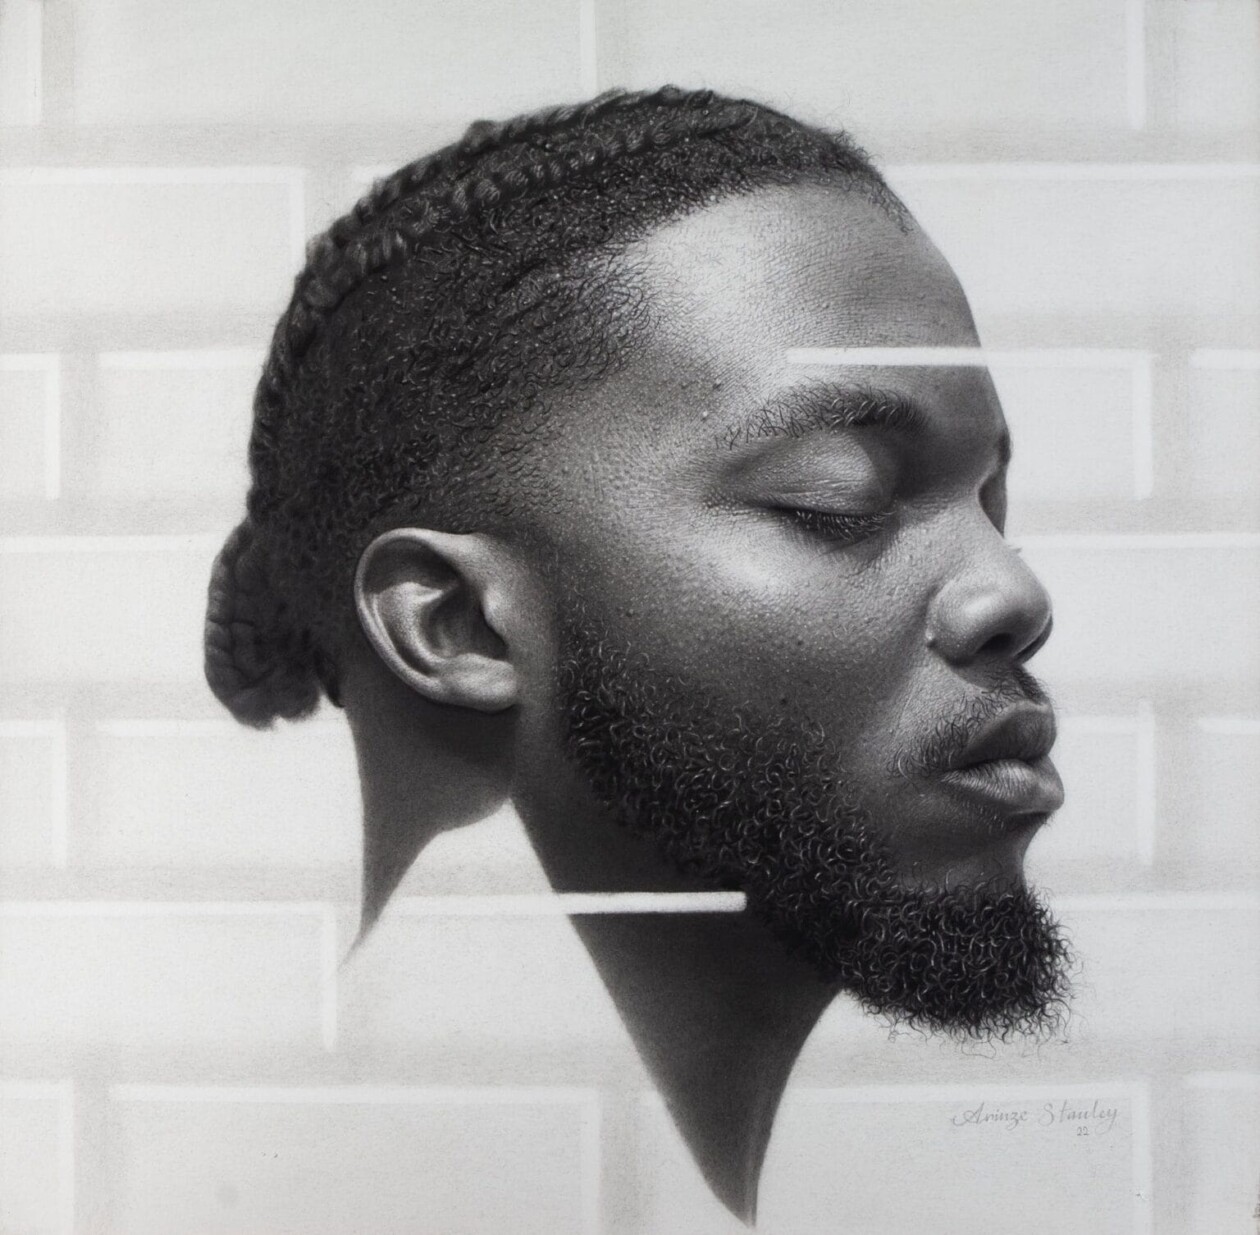 Hyperrealistic Black And White Pencil Drawings Of Arinze Stanley (18)